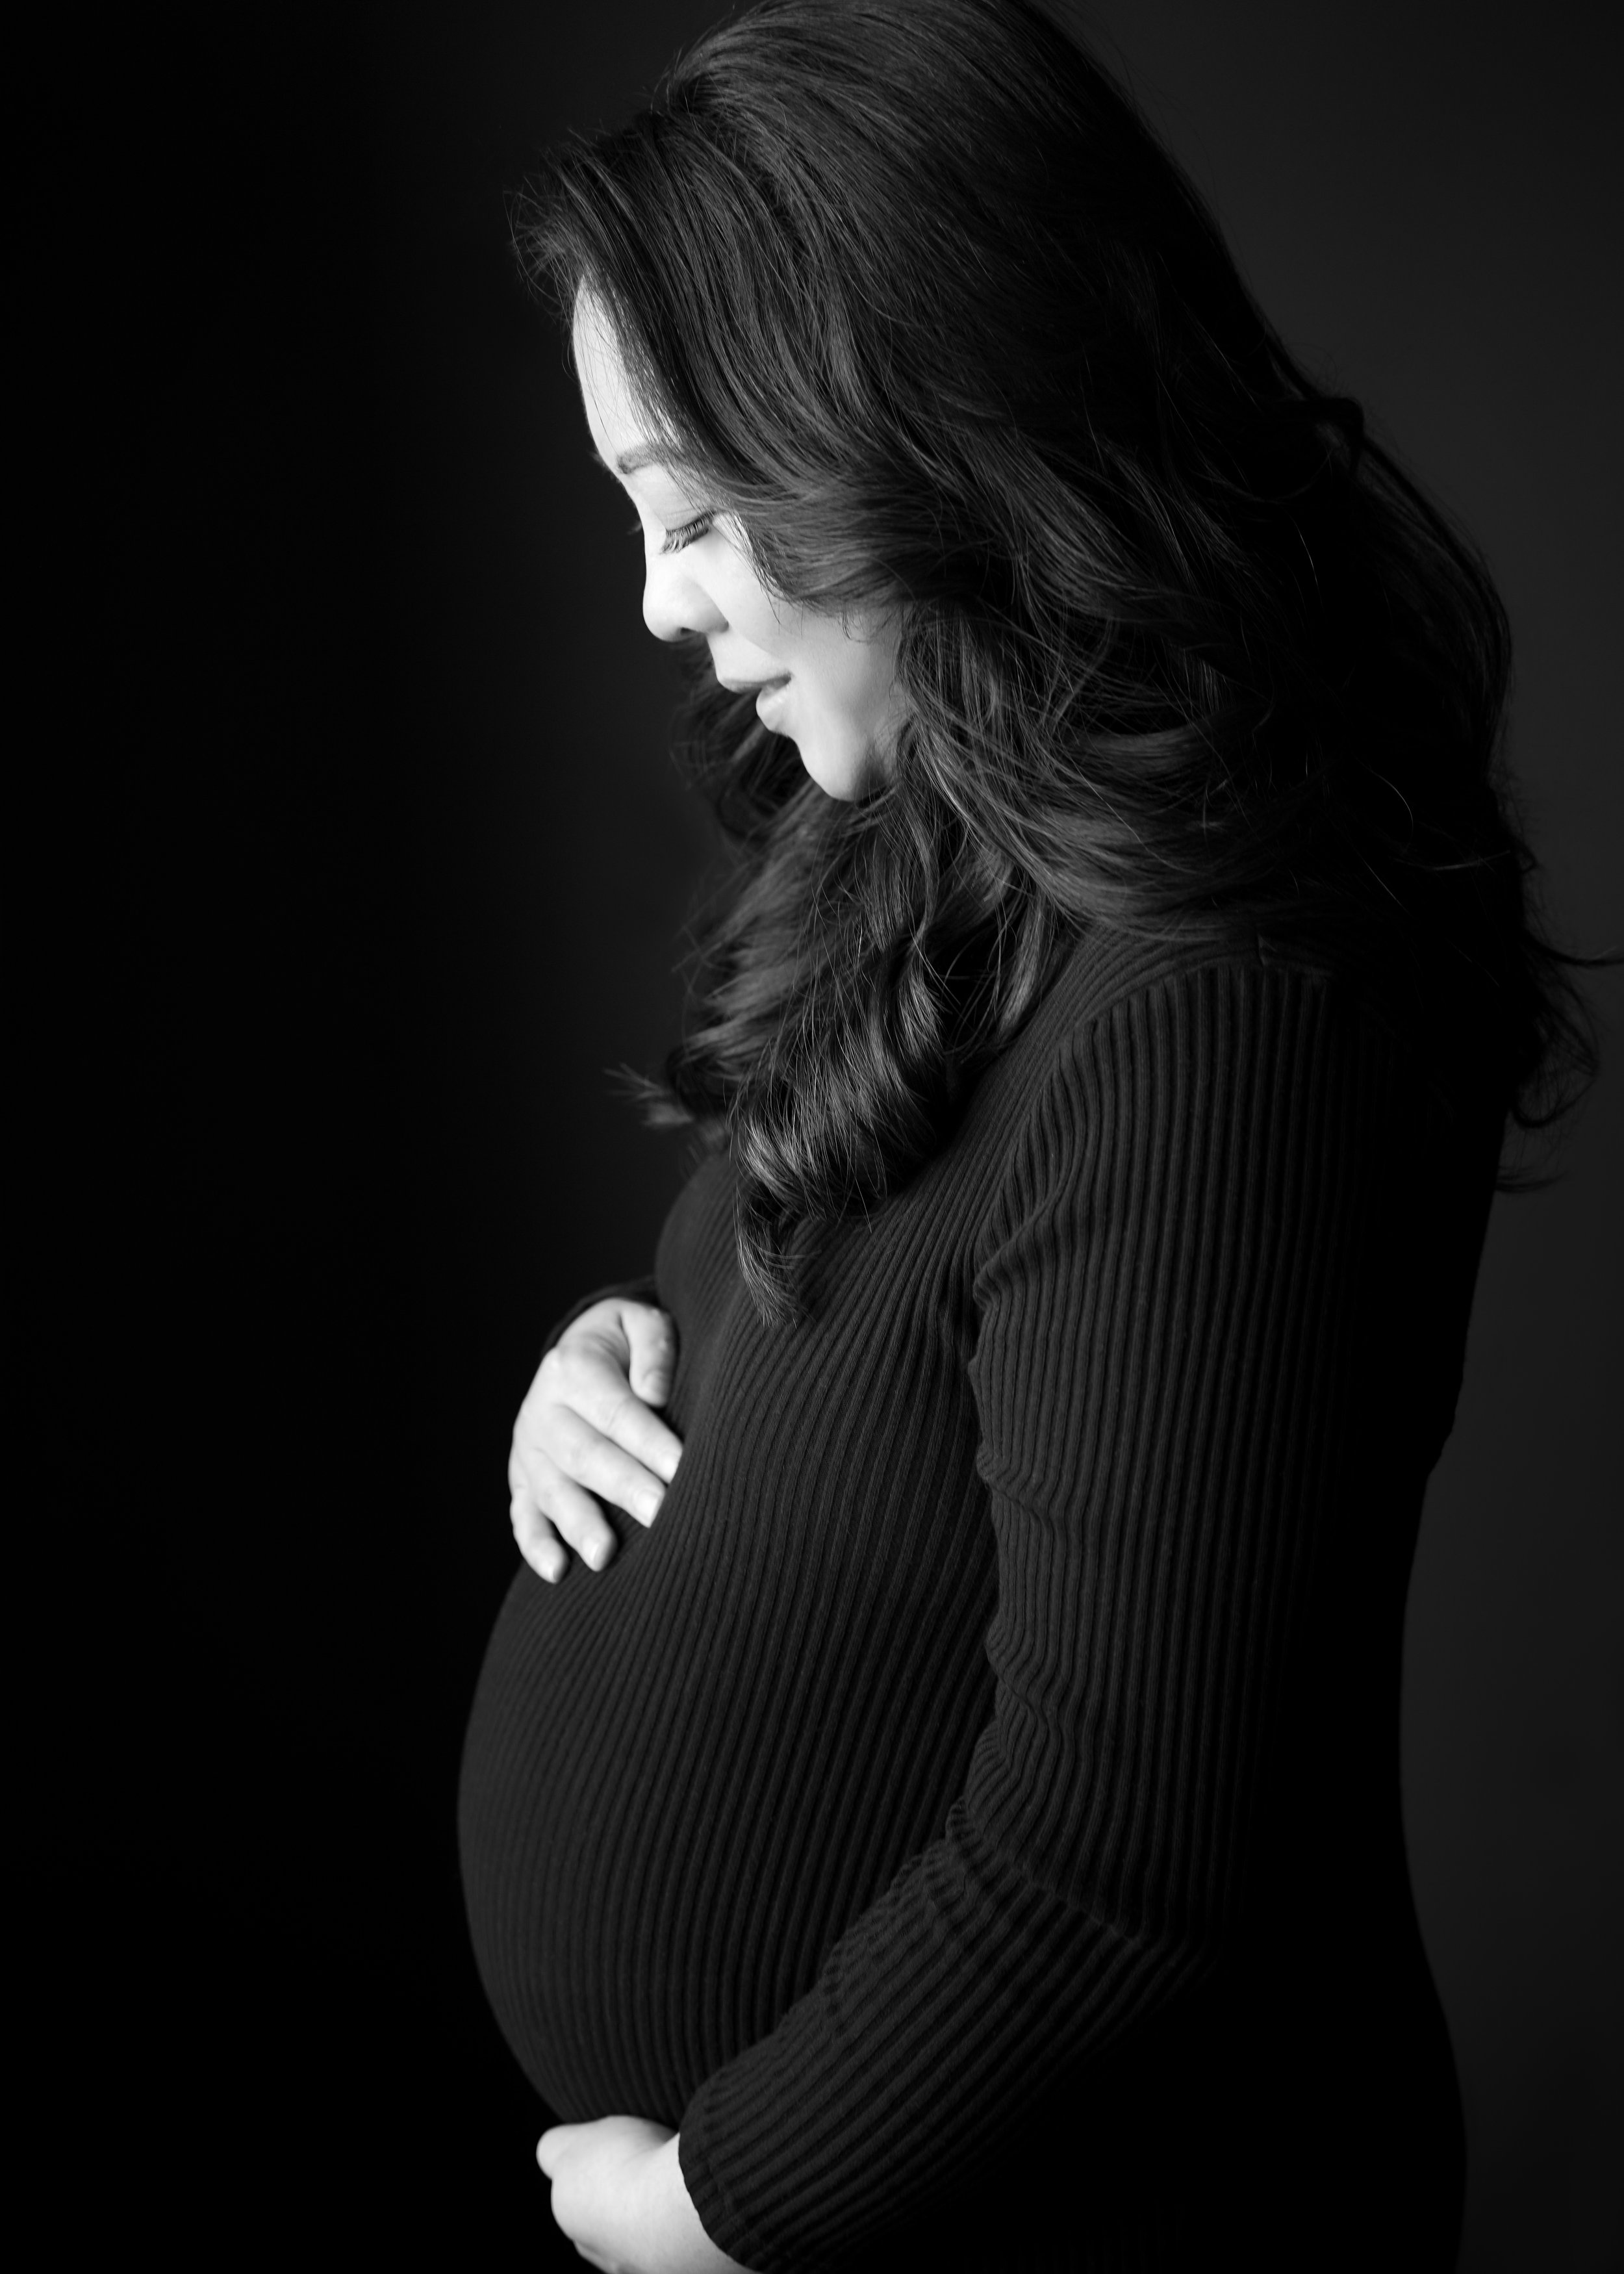 Silhouette Maternity Photography